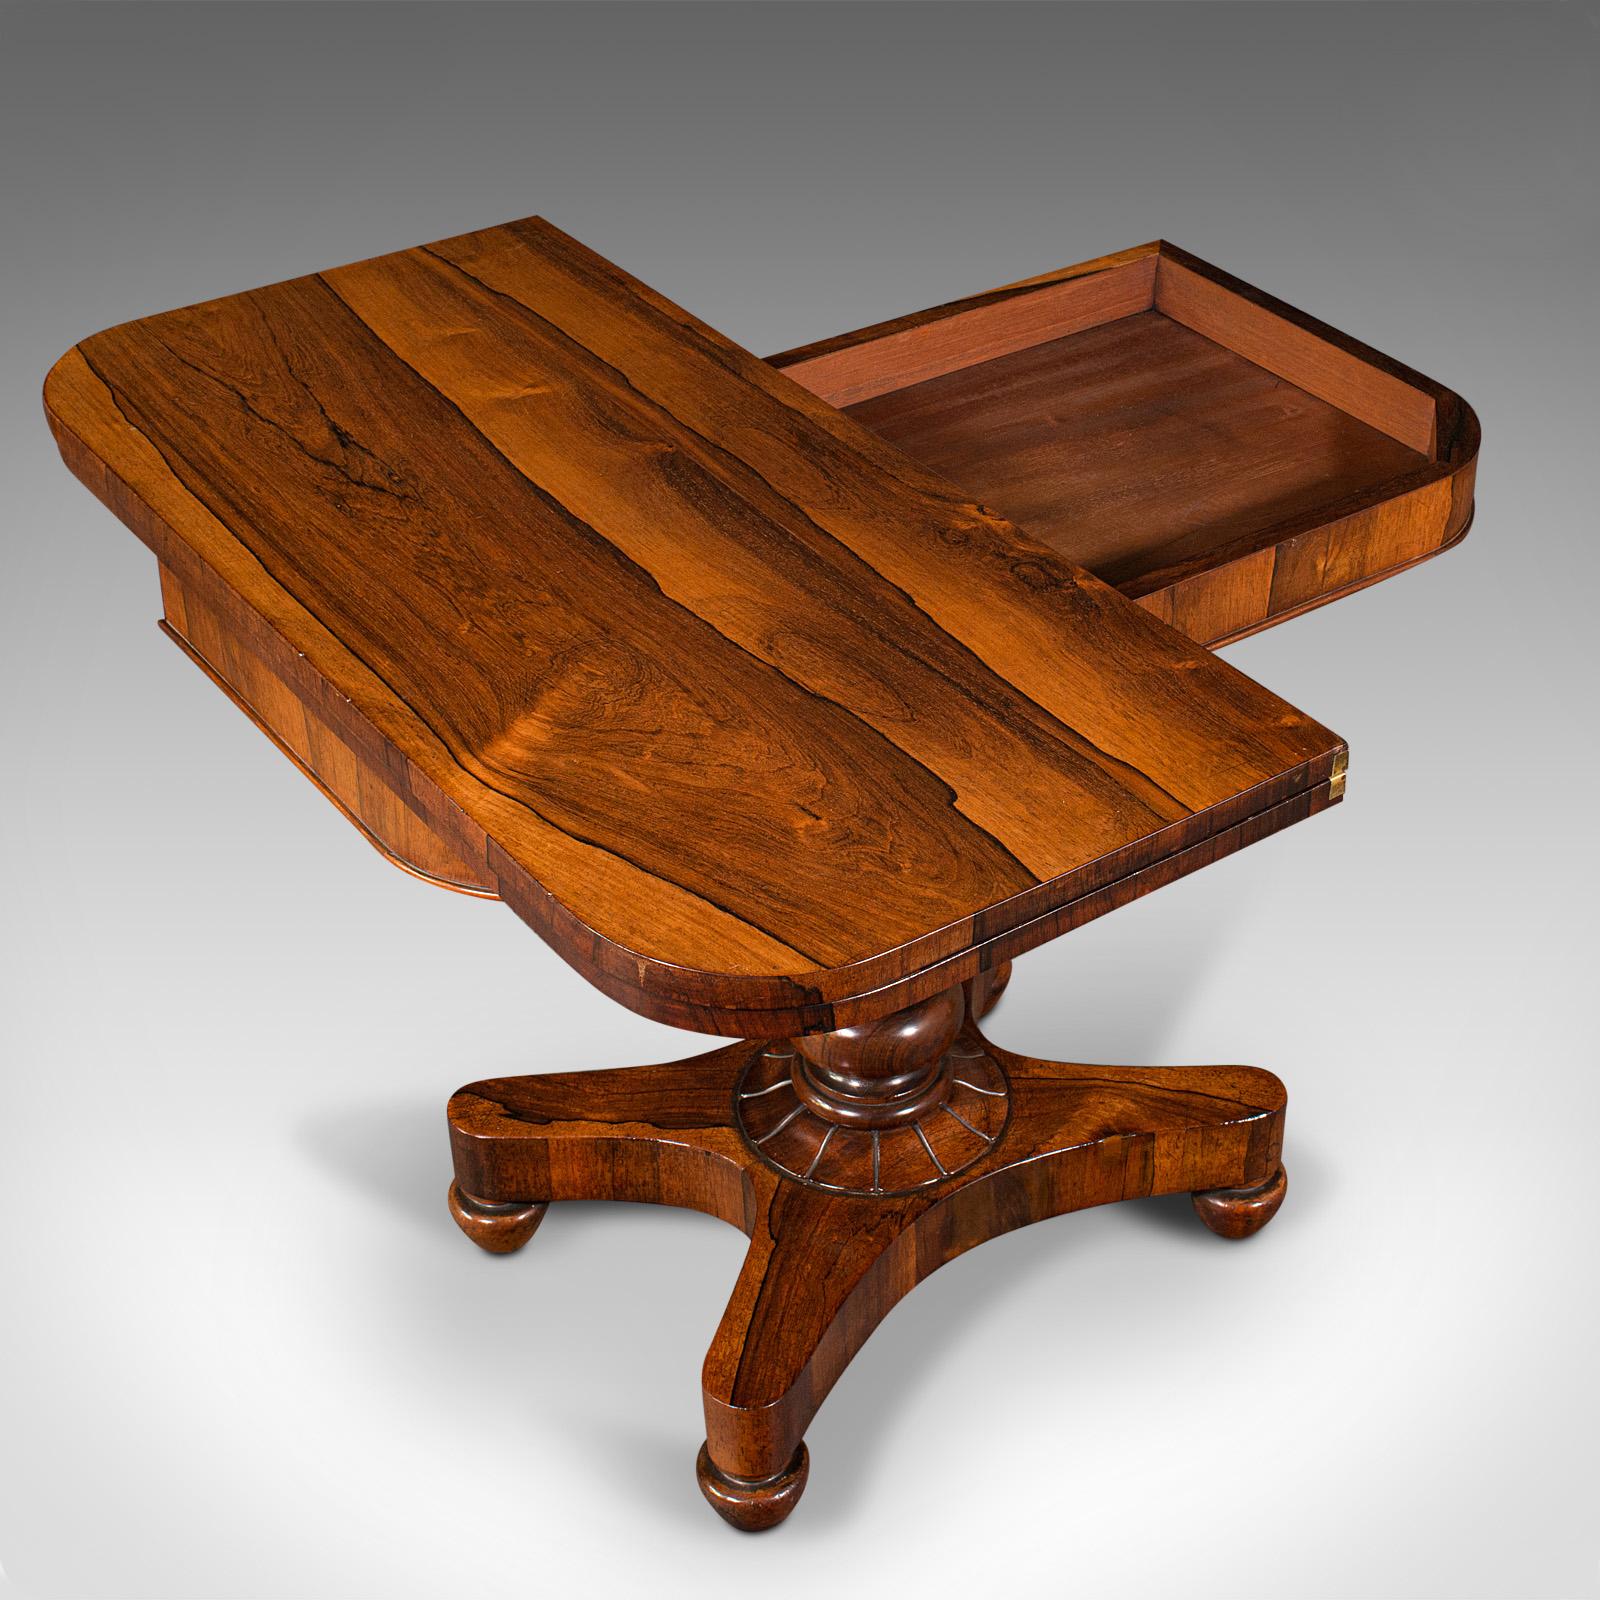 Wood Antique Fold-Over Card Table, English, Games, Console, William IV, Circa 1835 For Sale